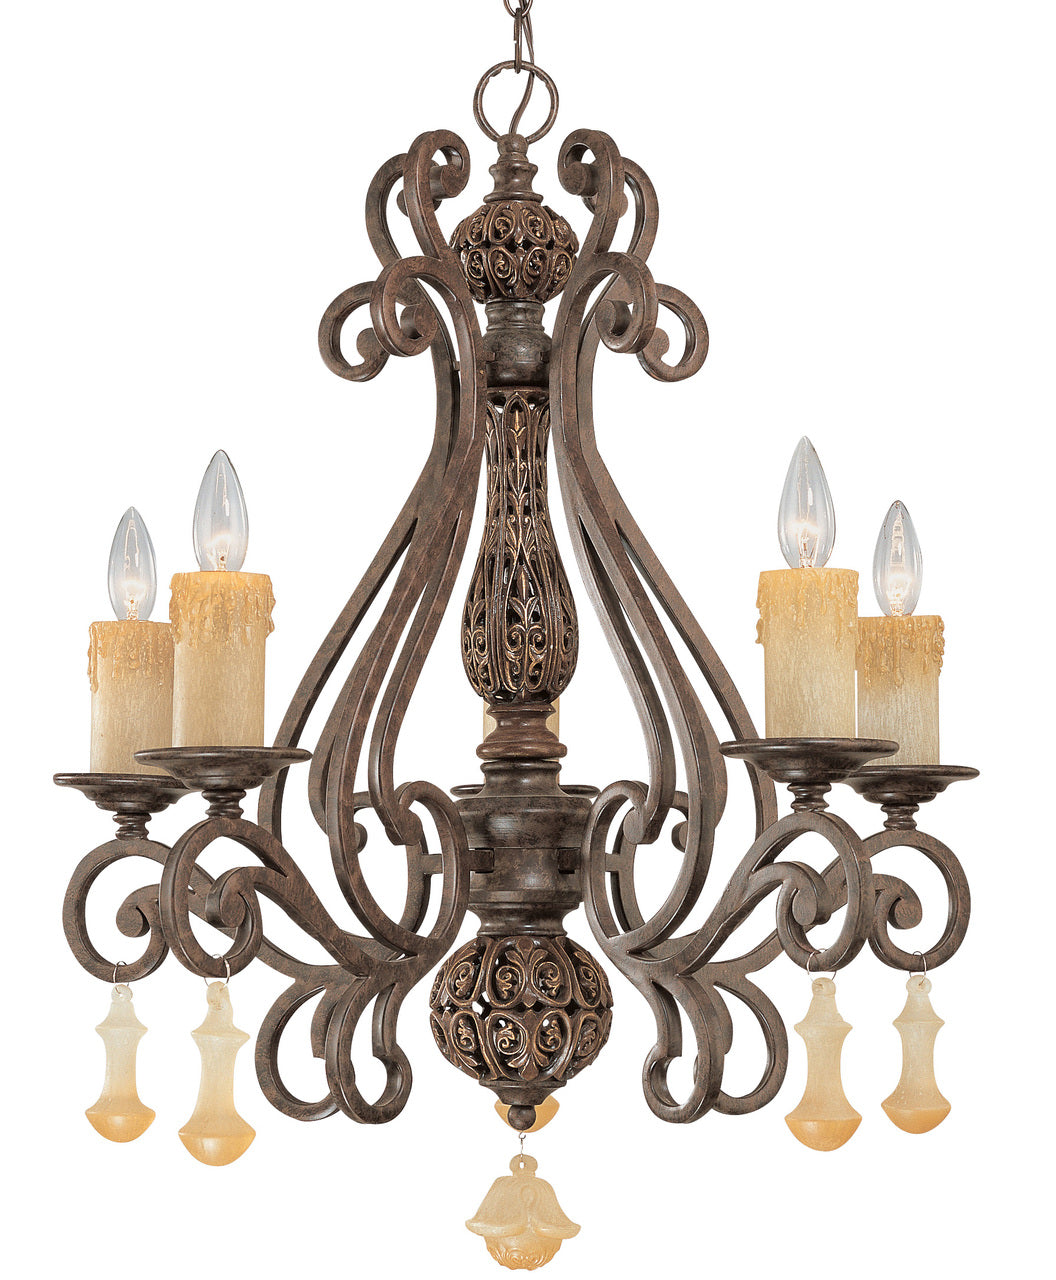 Classic Lighting 71155 TS Riviera Wrought Iron Chandelier in Tortoise Shell